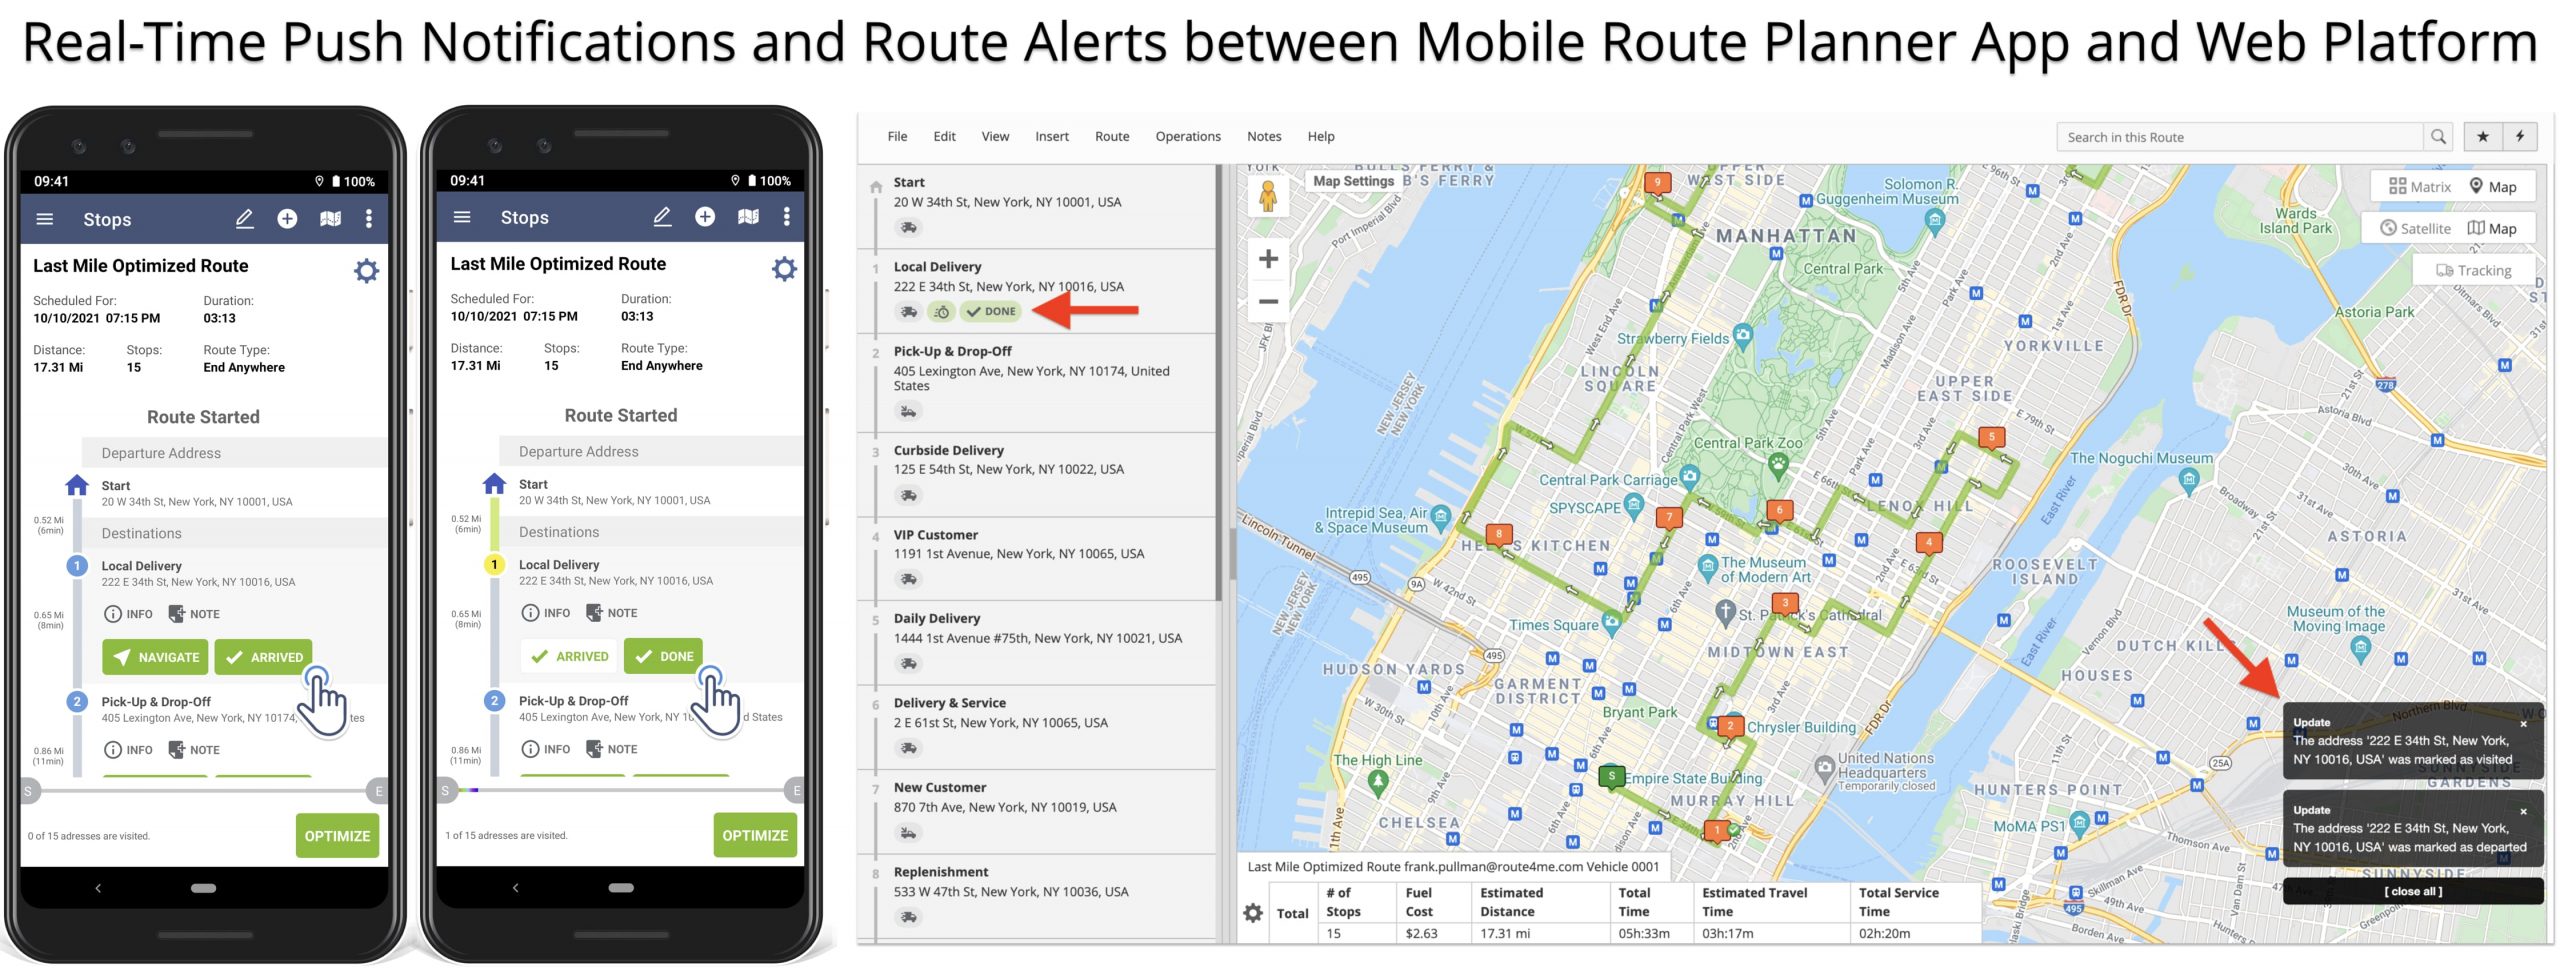 Real-time route change notifications and alerts between Mobile Route Planner App and Web Platform.